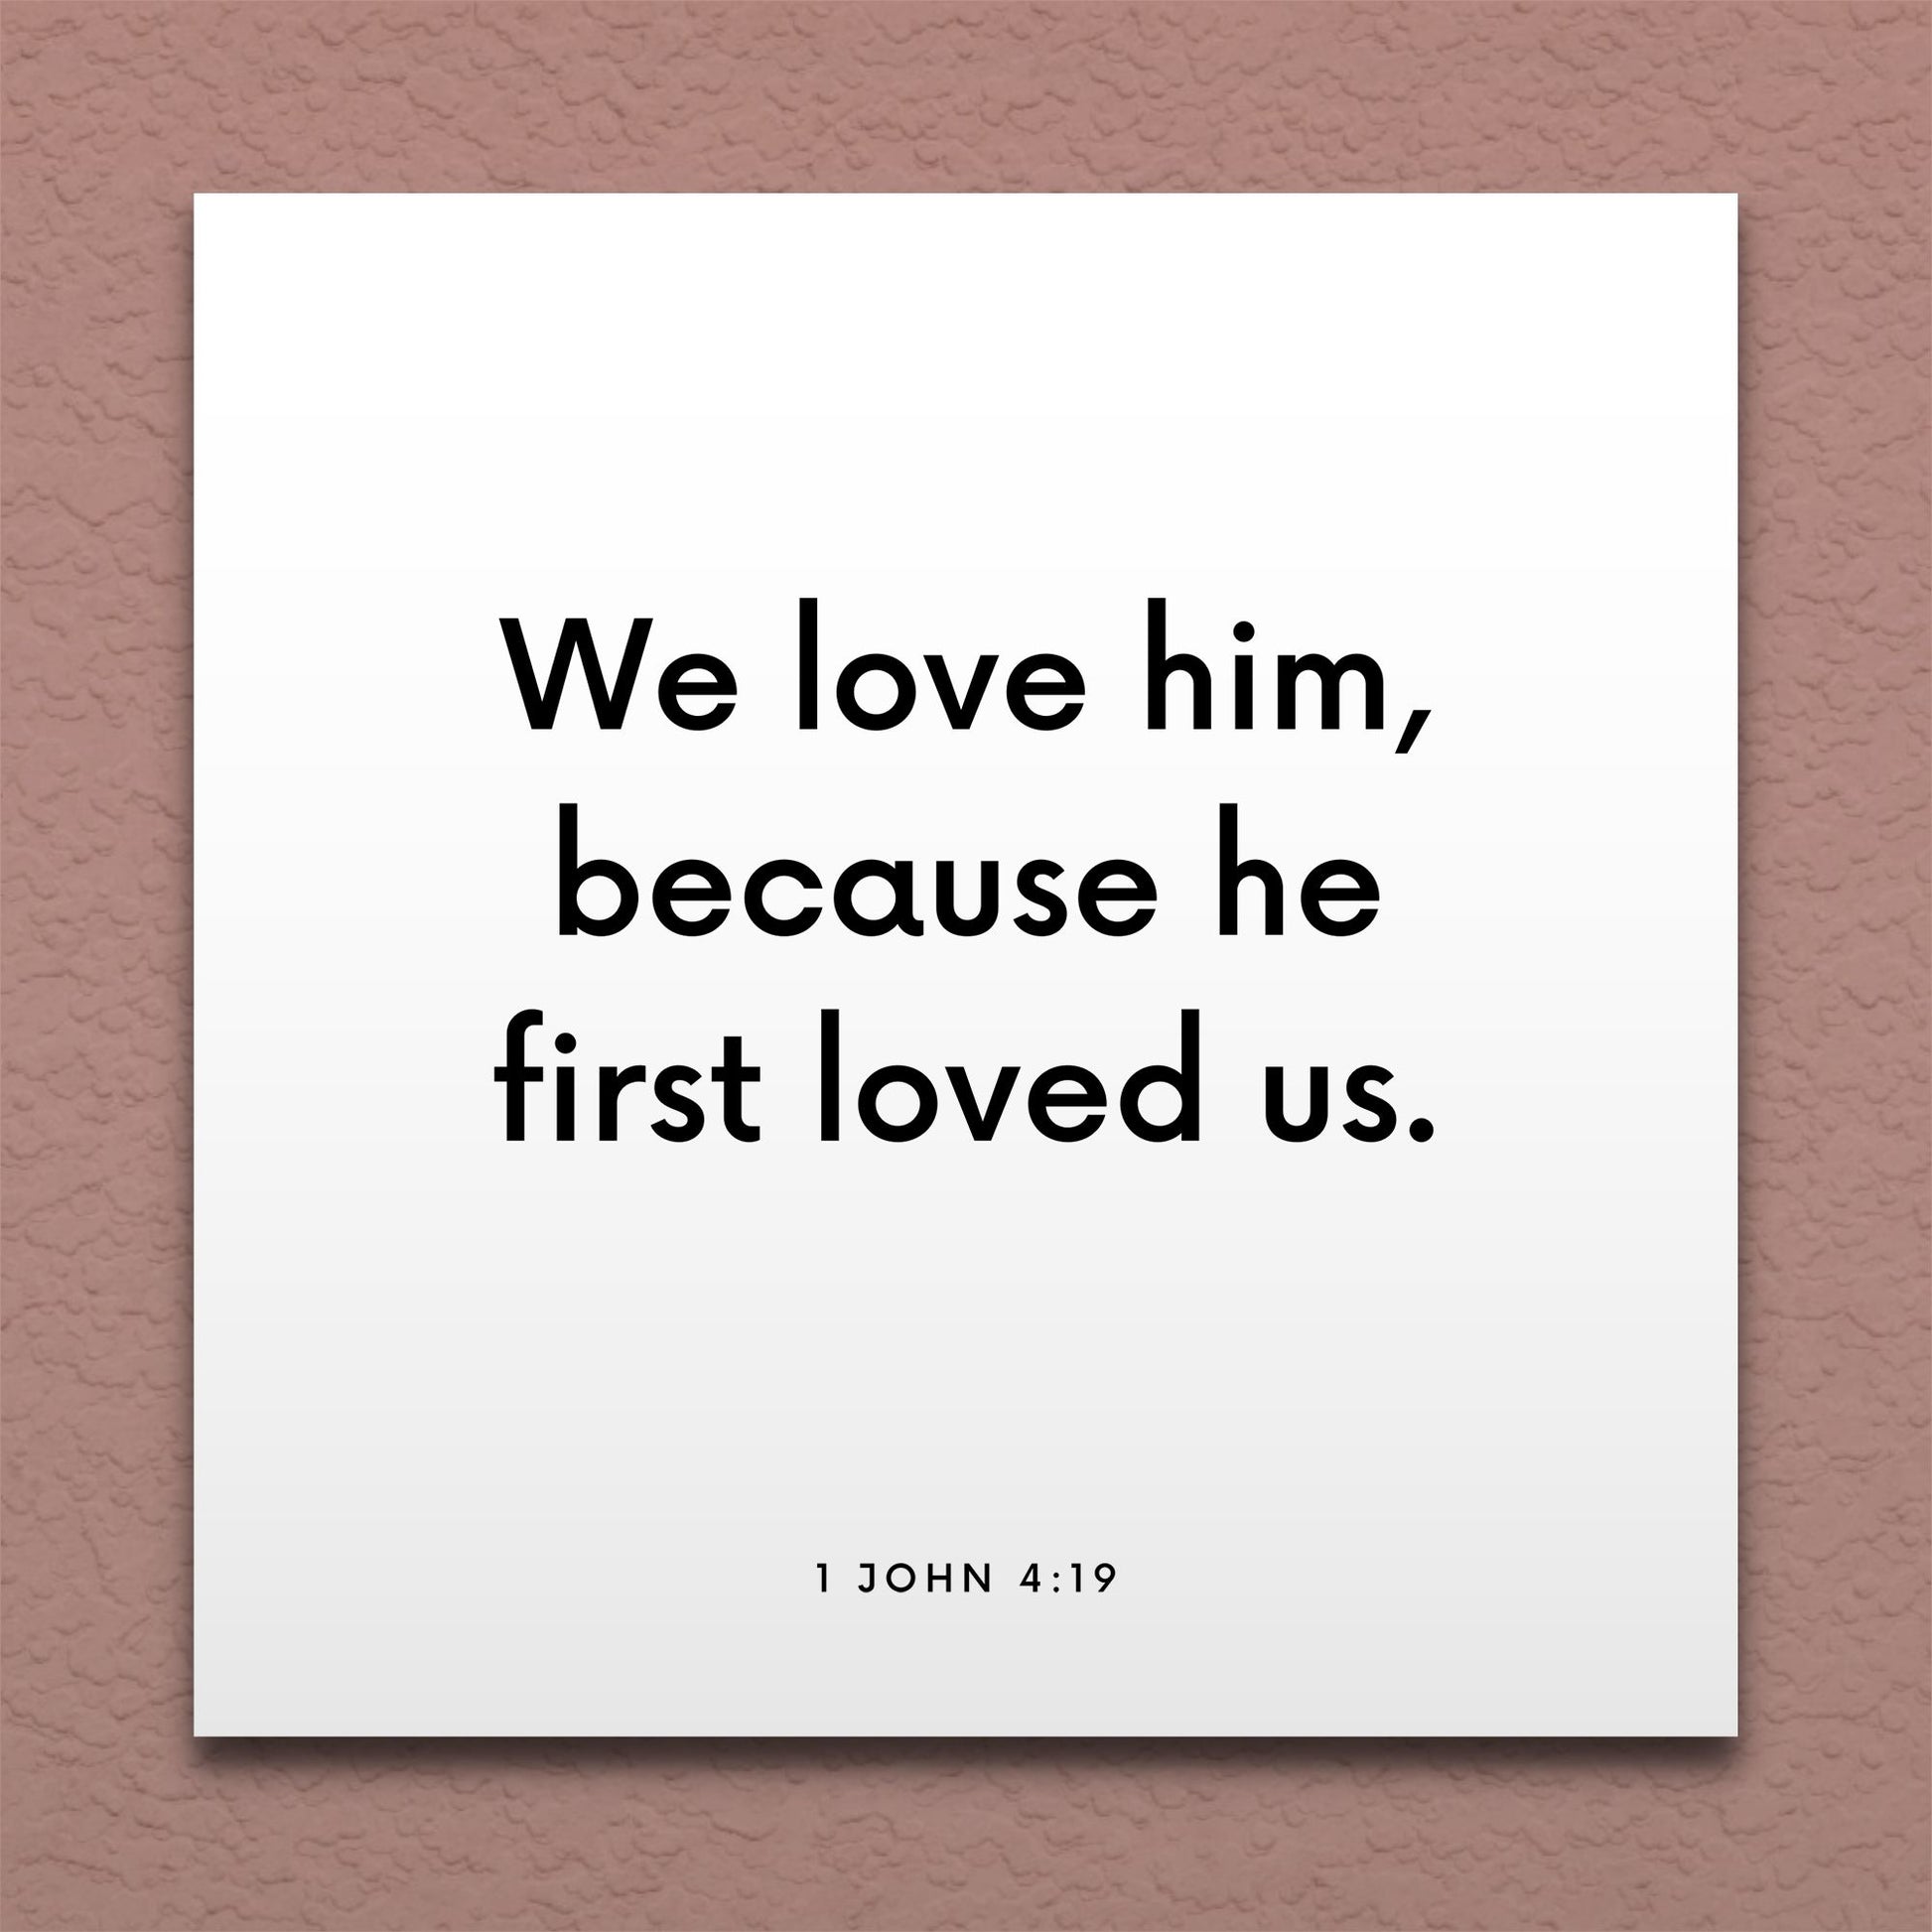 Wall-mounted scripture tile for 1 John 4:19 - "We love him, because he first loved us"